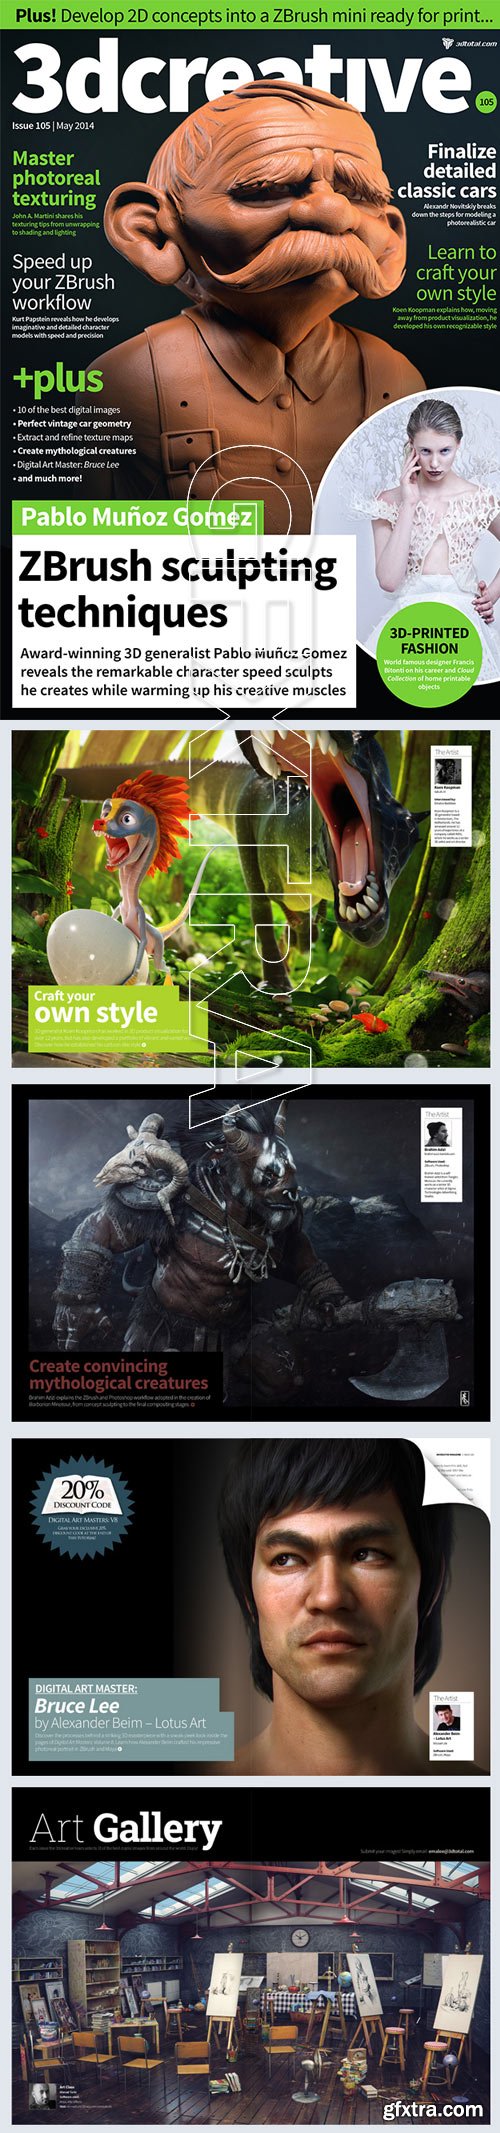 3DCreative: Issue 105 - May 2014 HiRes